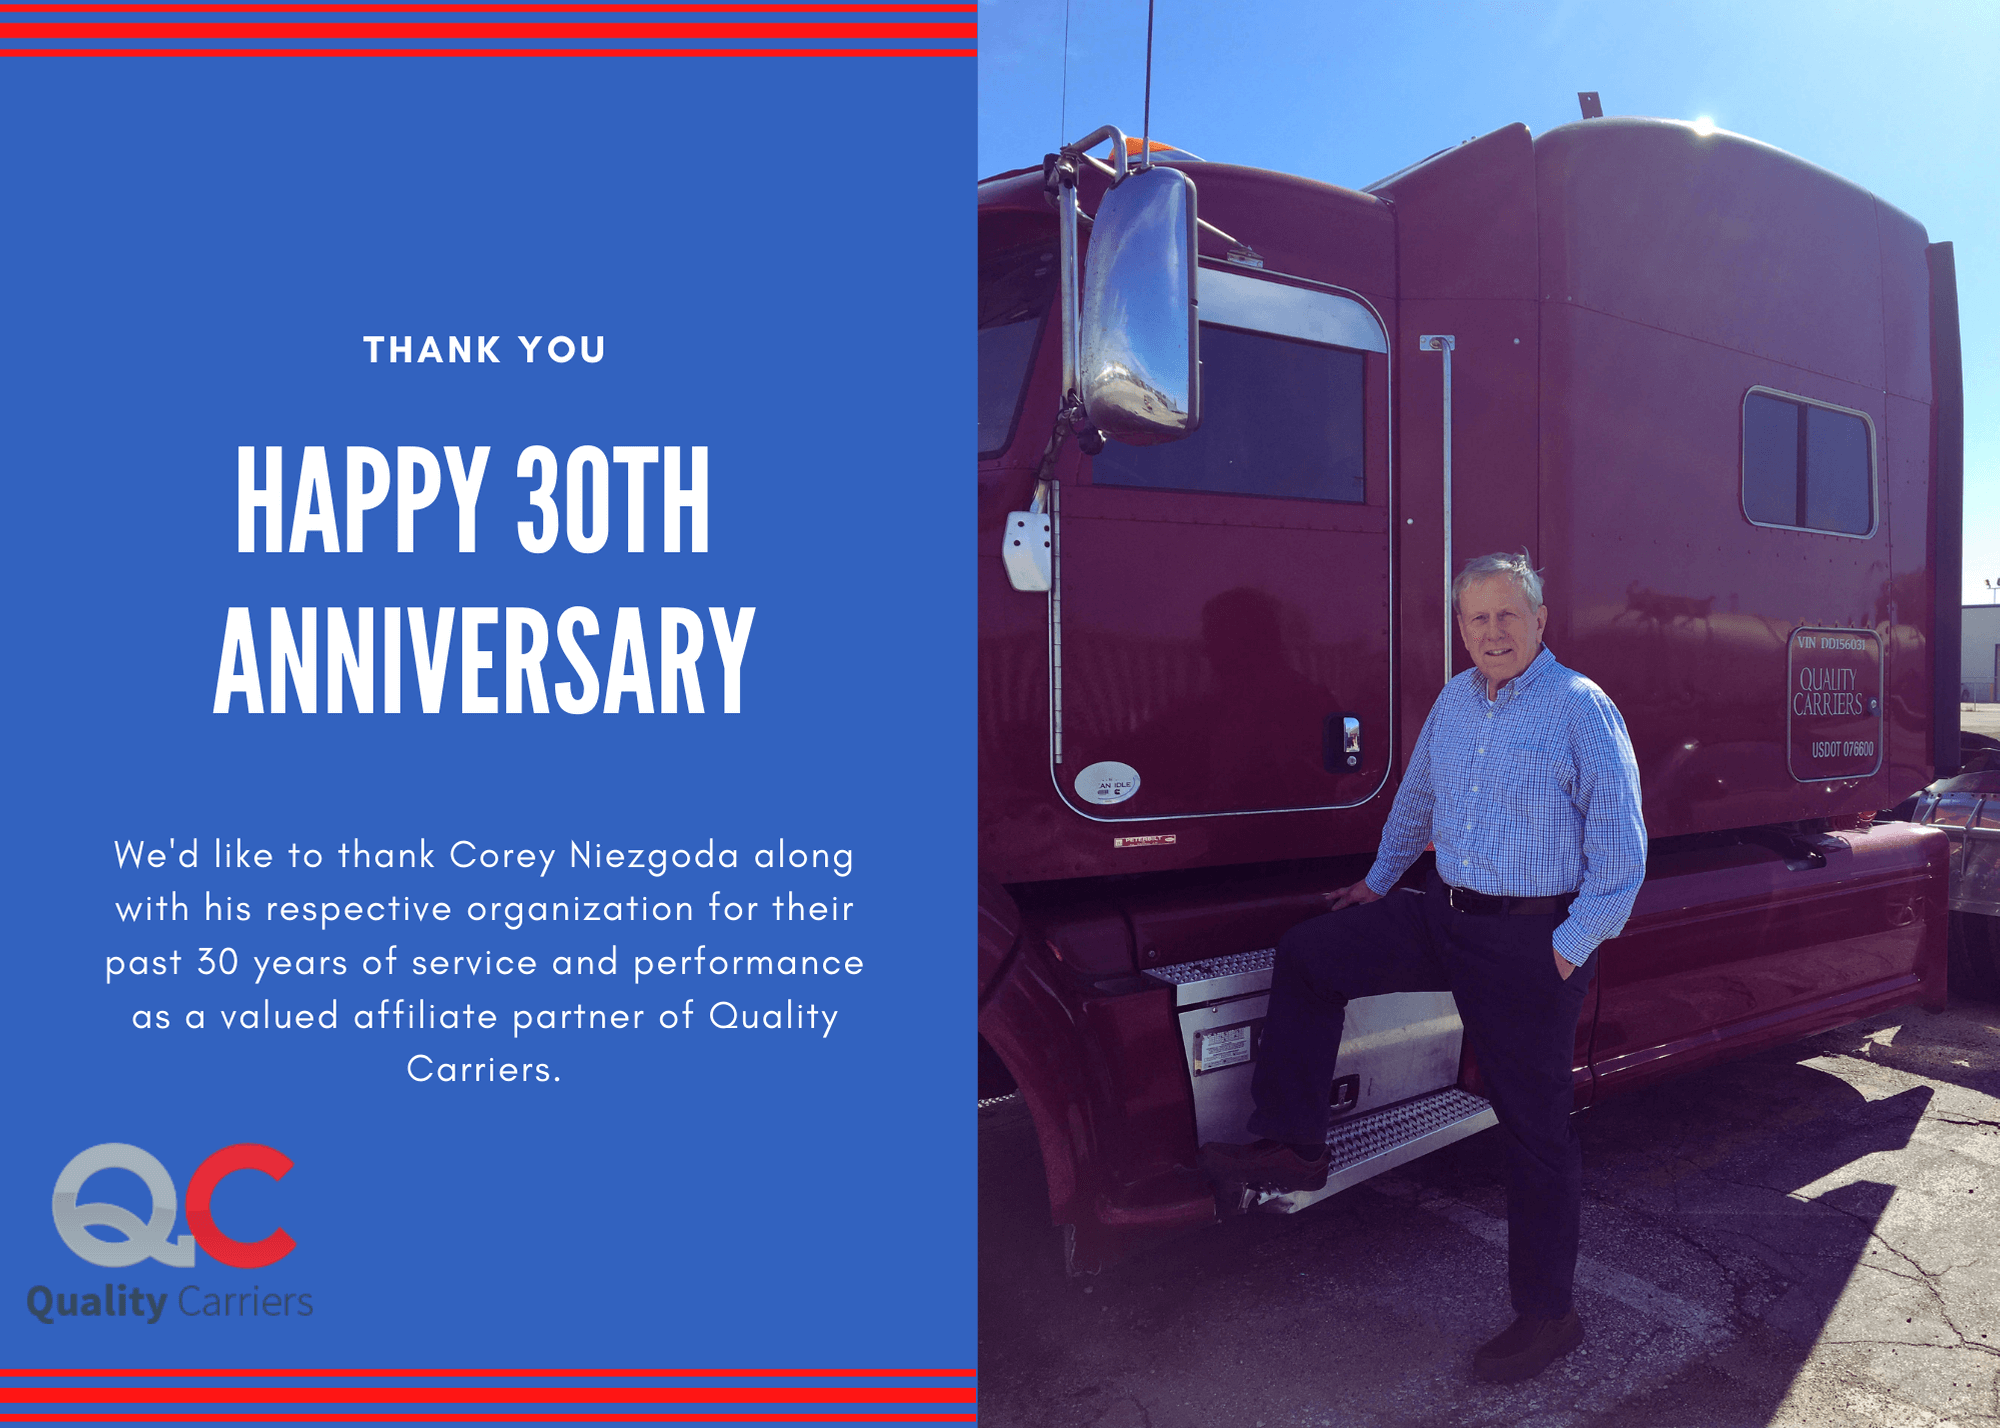 Congratulations on 30 years as a valued Quality Carriers affiliate partner.